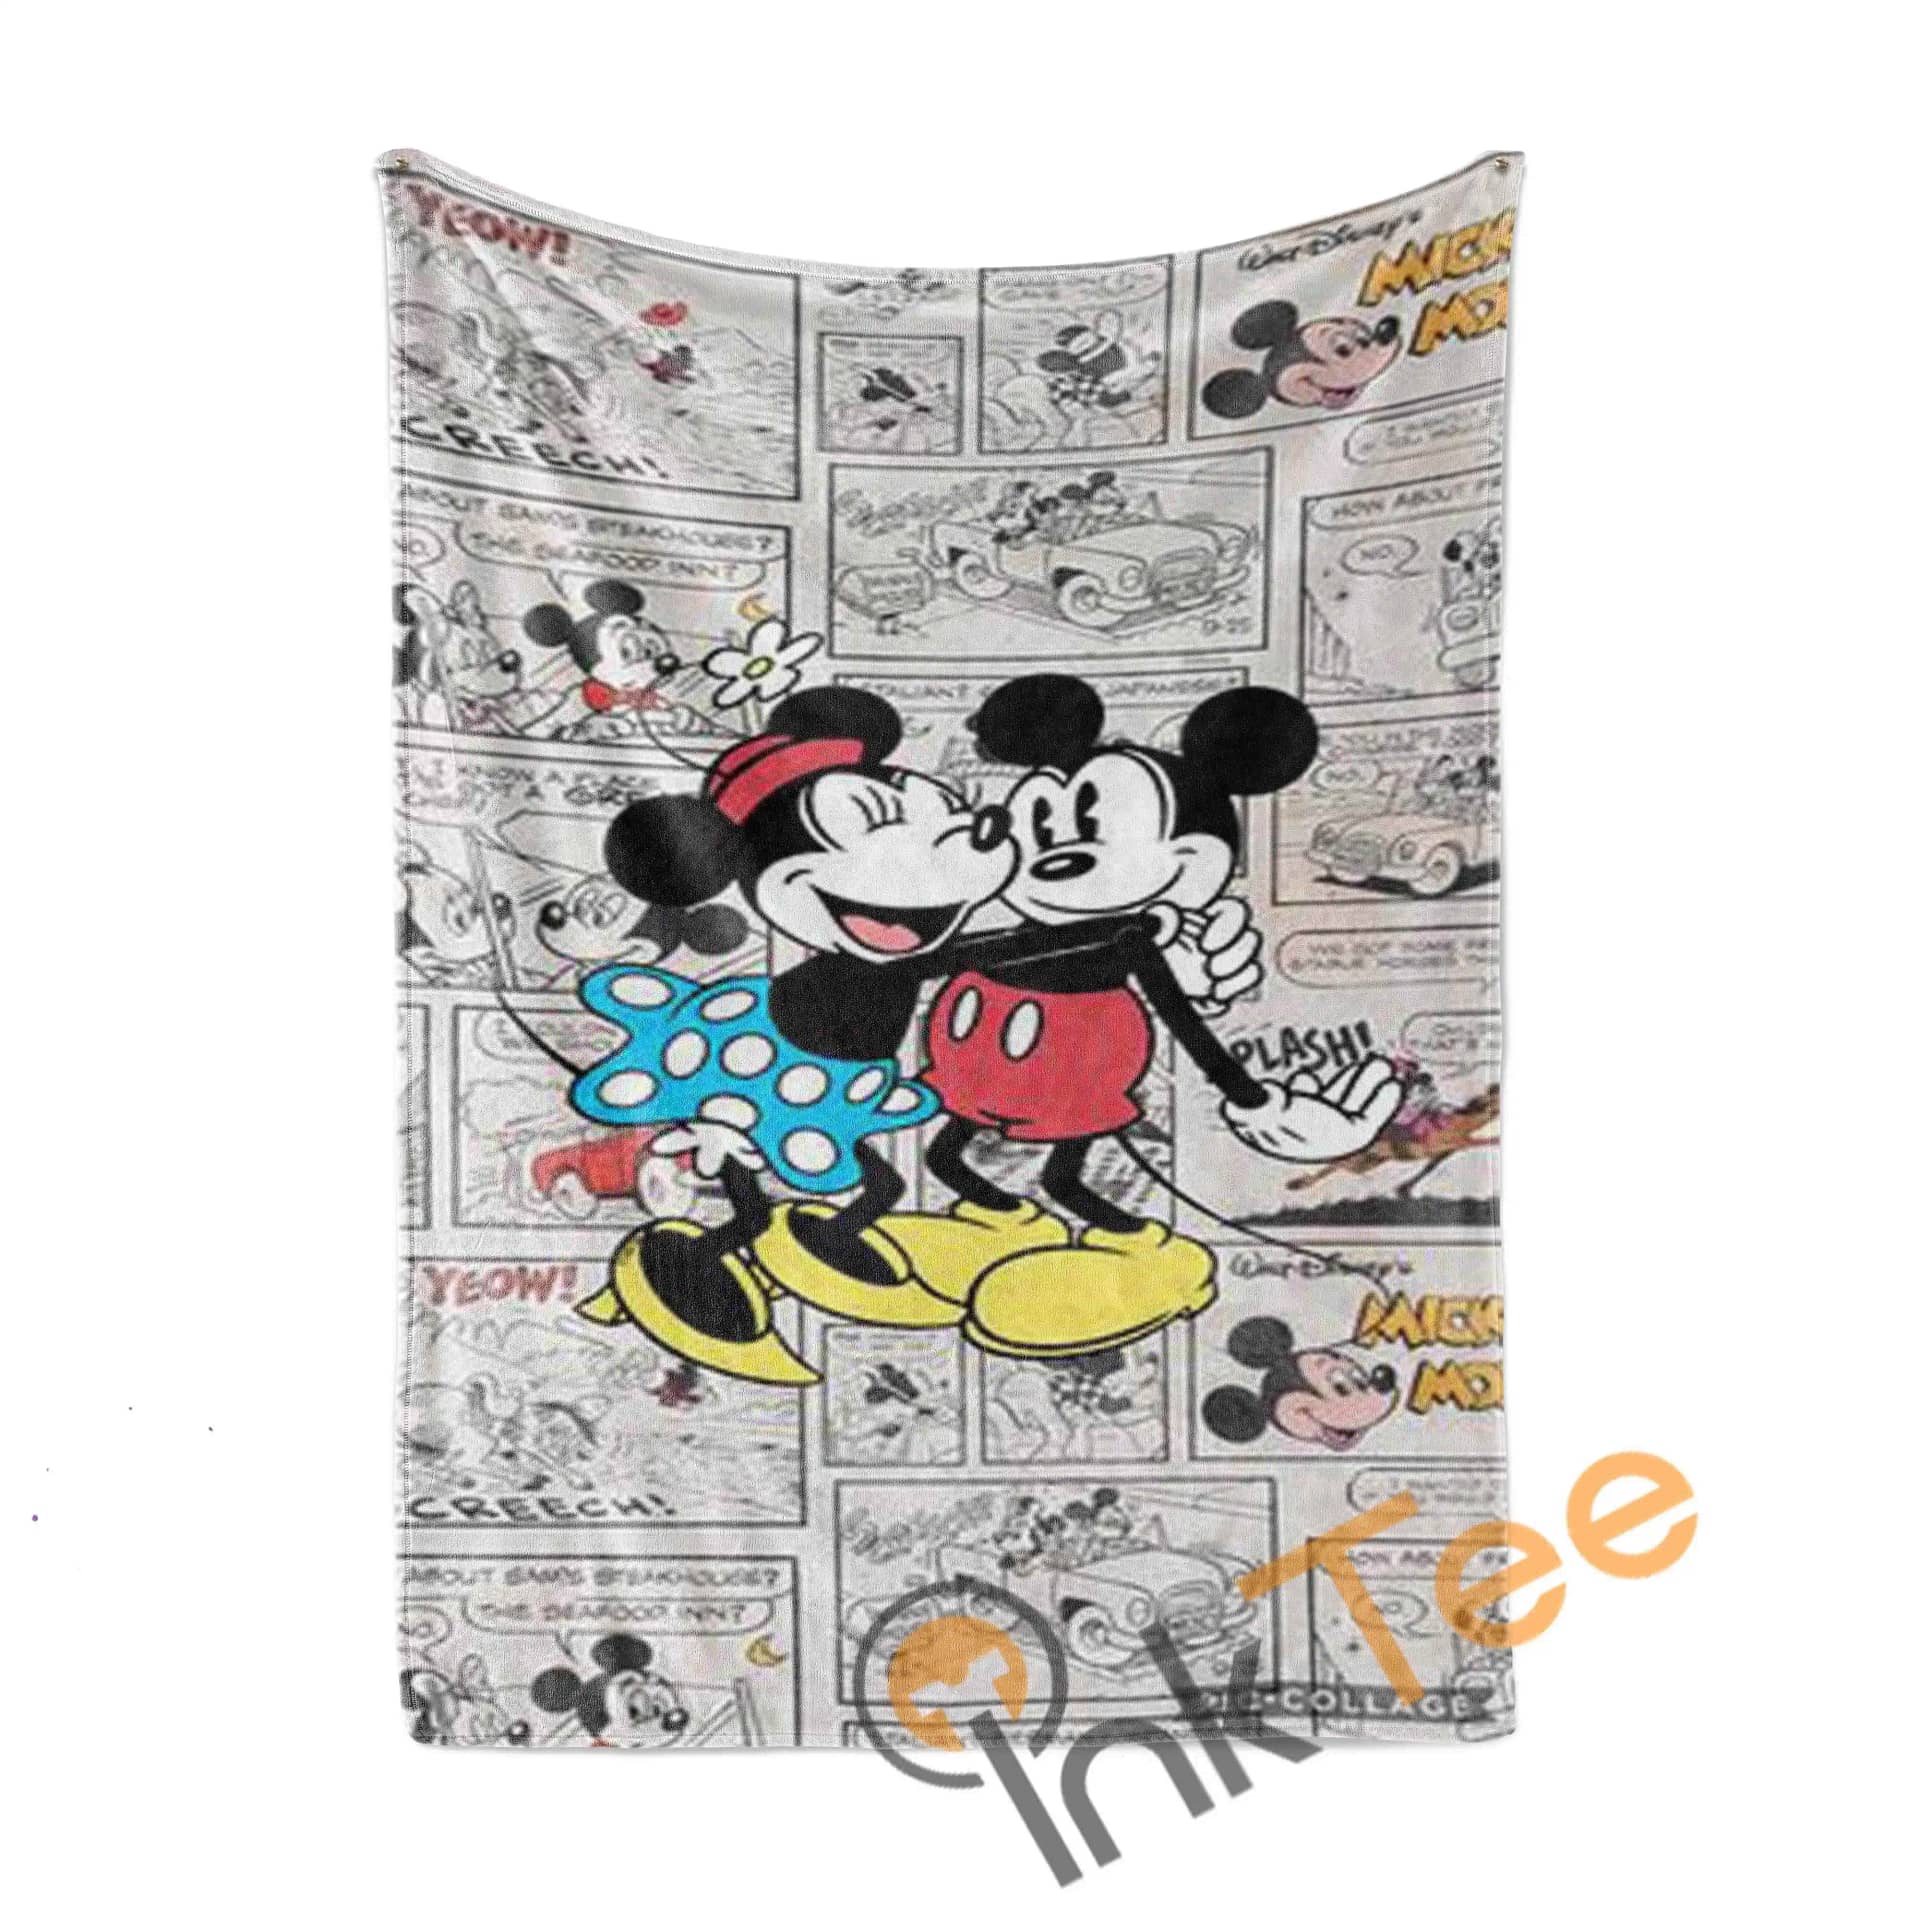 Minnie And Mickey Mouse Couple Limited Edition Amazon Best Seller Sku 4094 Fleece Blanket